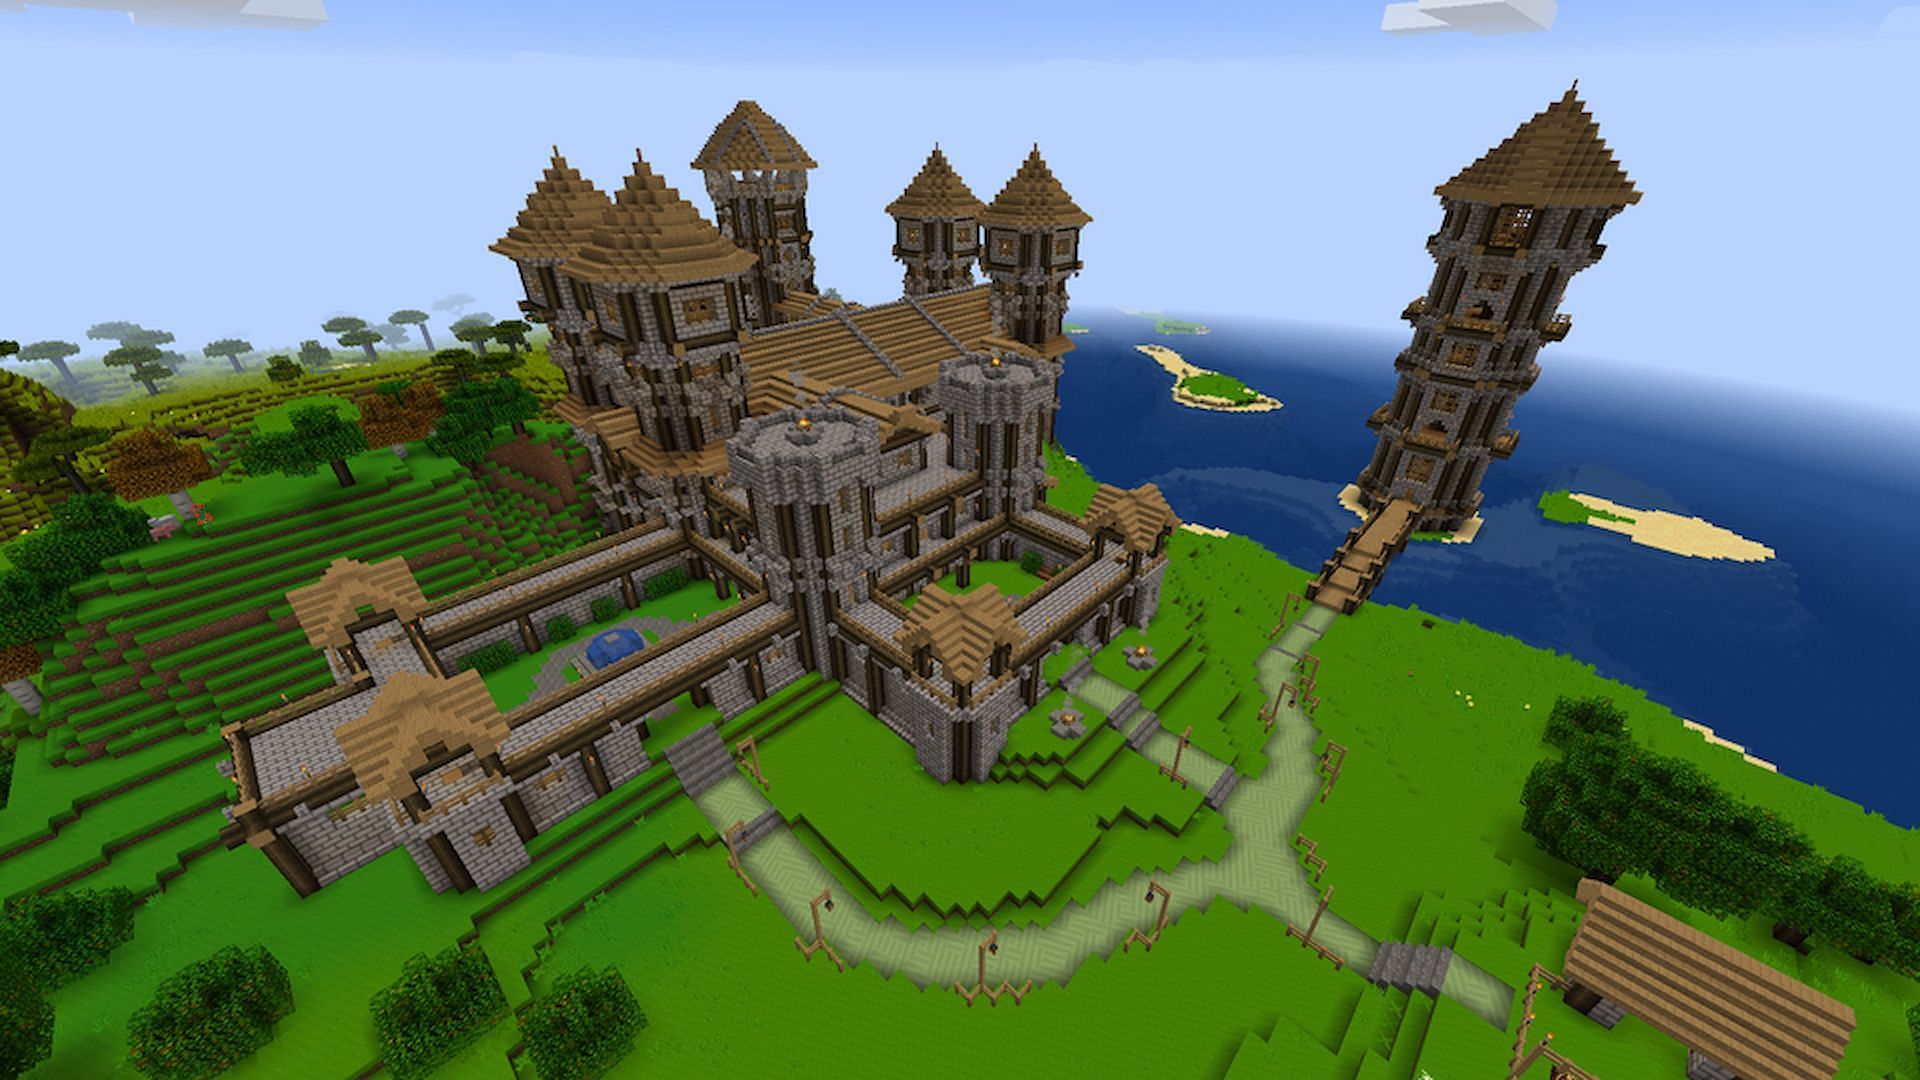 This amazing survival castle is truly a sight to behold in Minecraft (Image via u/DTH217/Reddit)